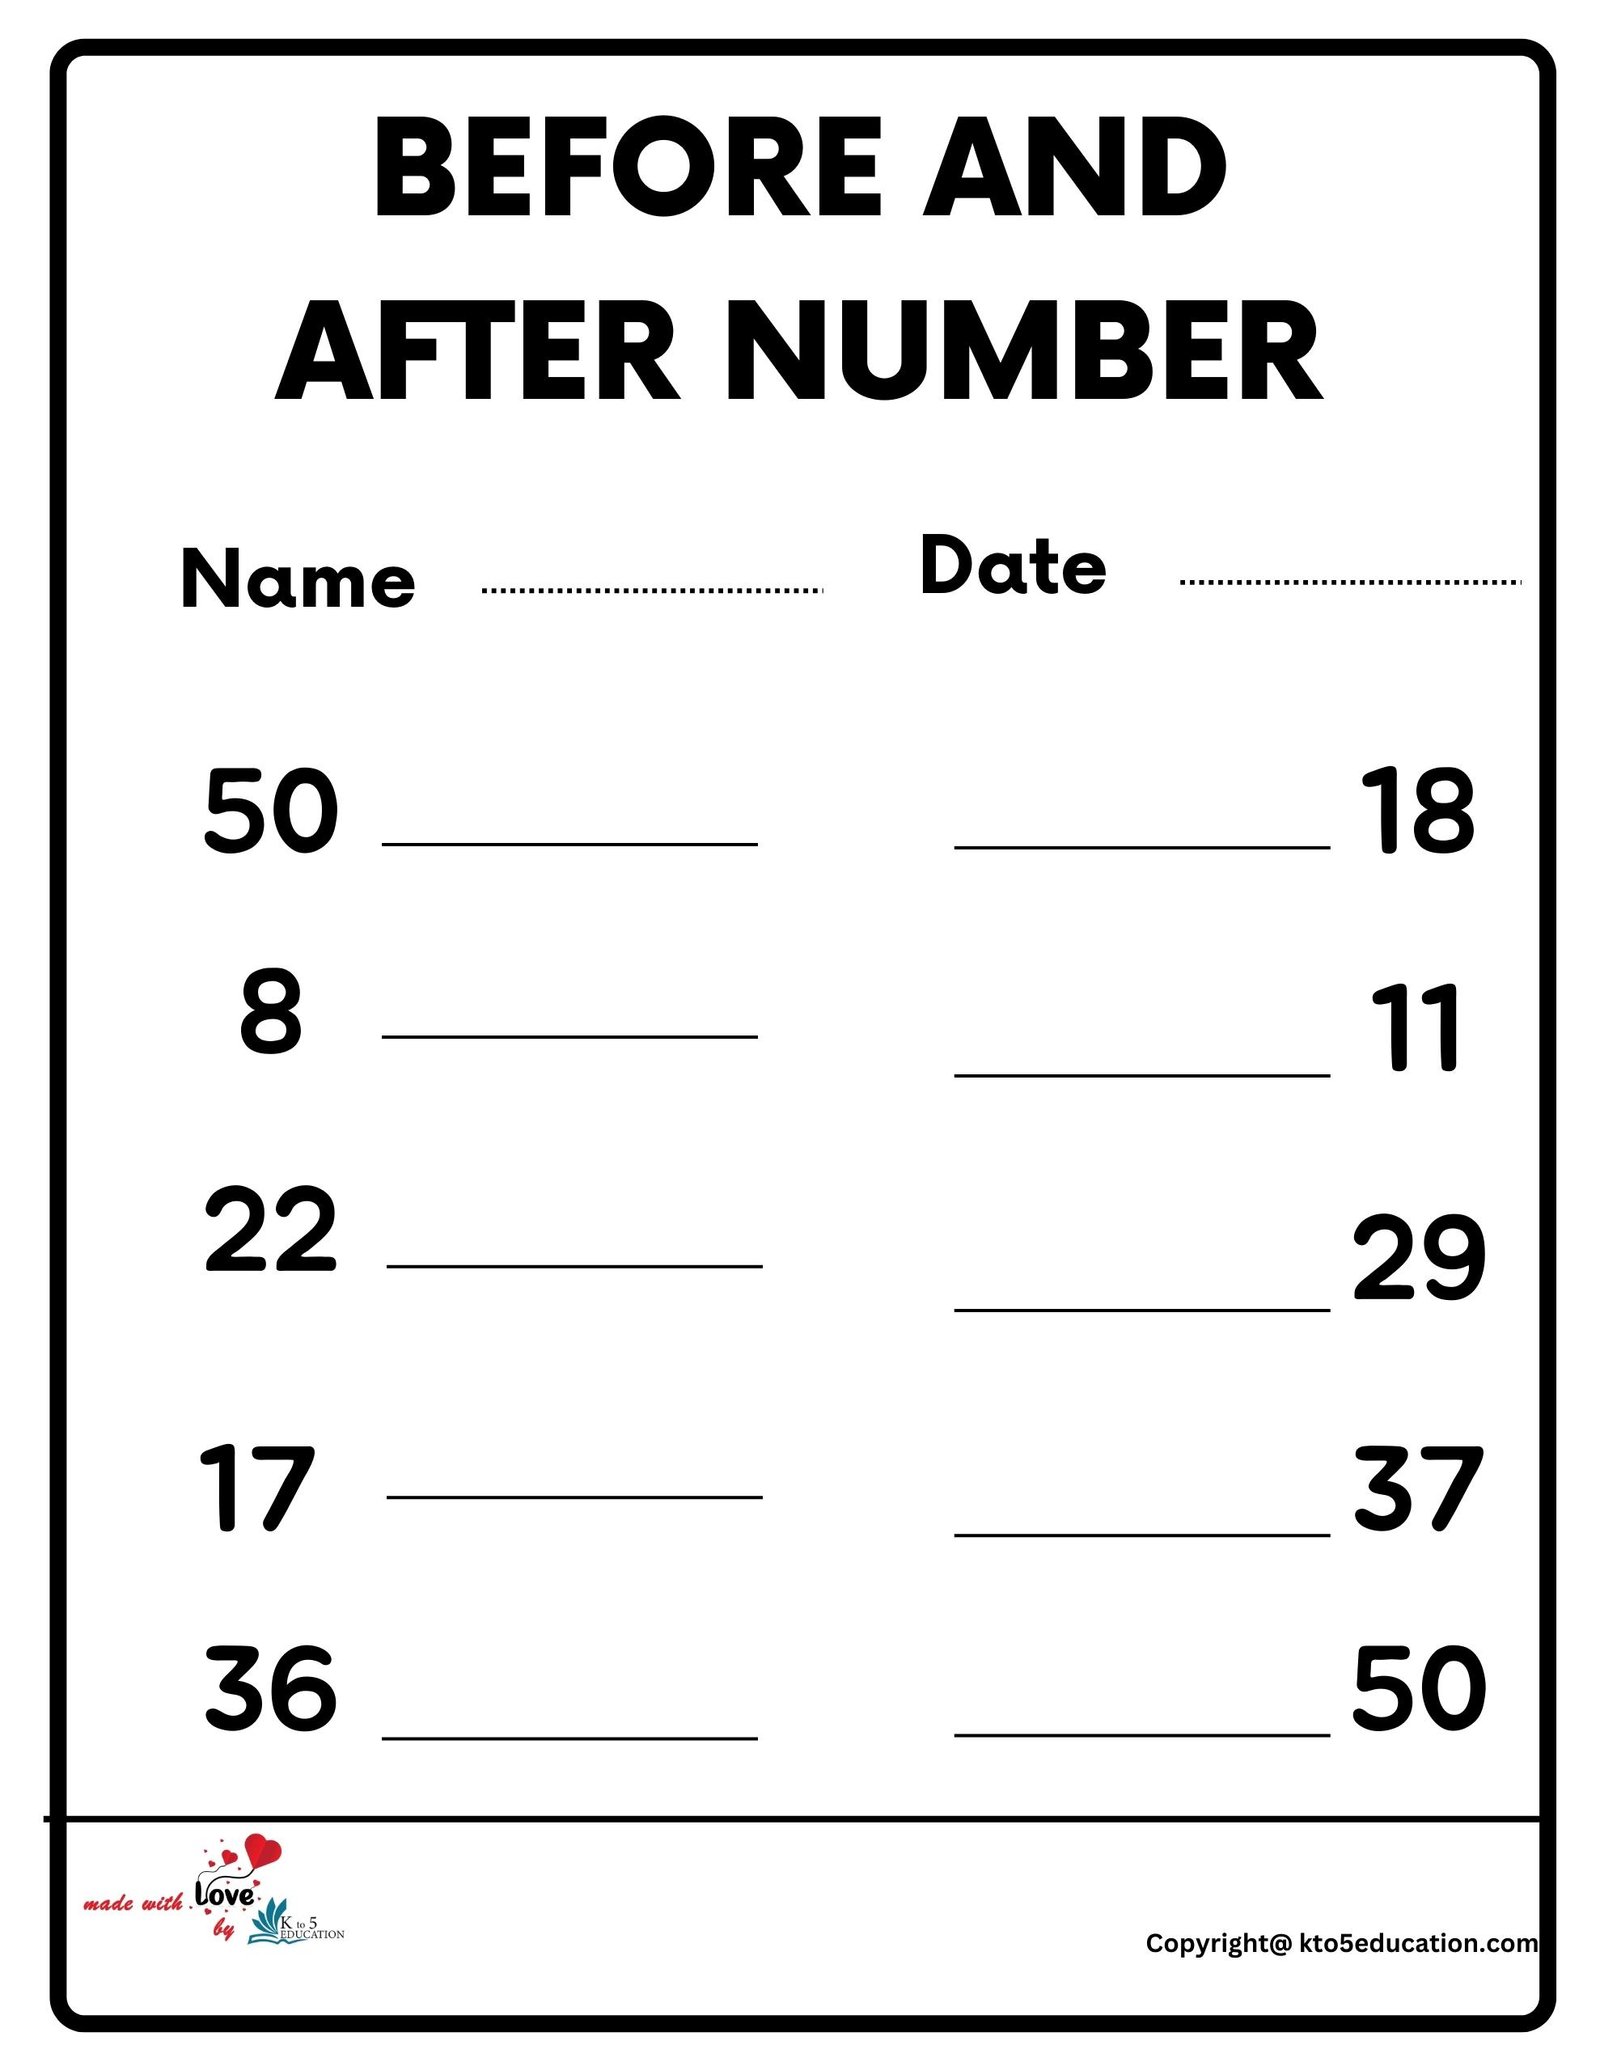 Before And After Number Worksheet FREE Download